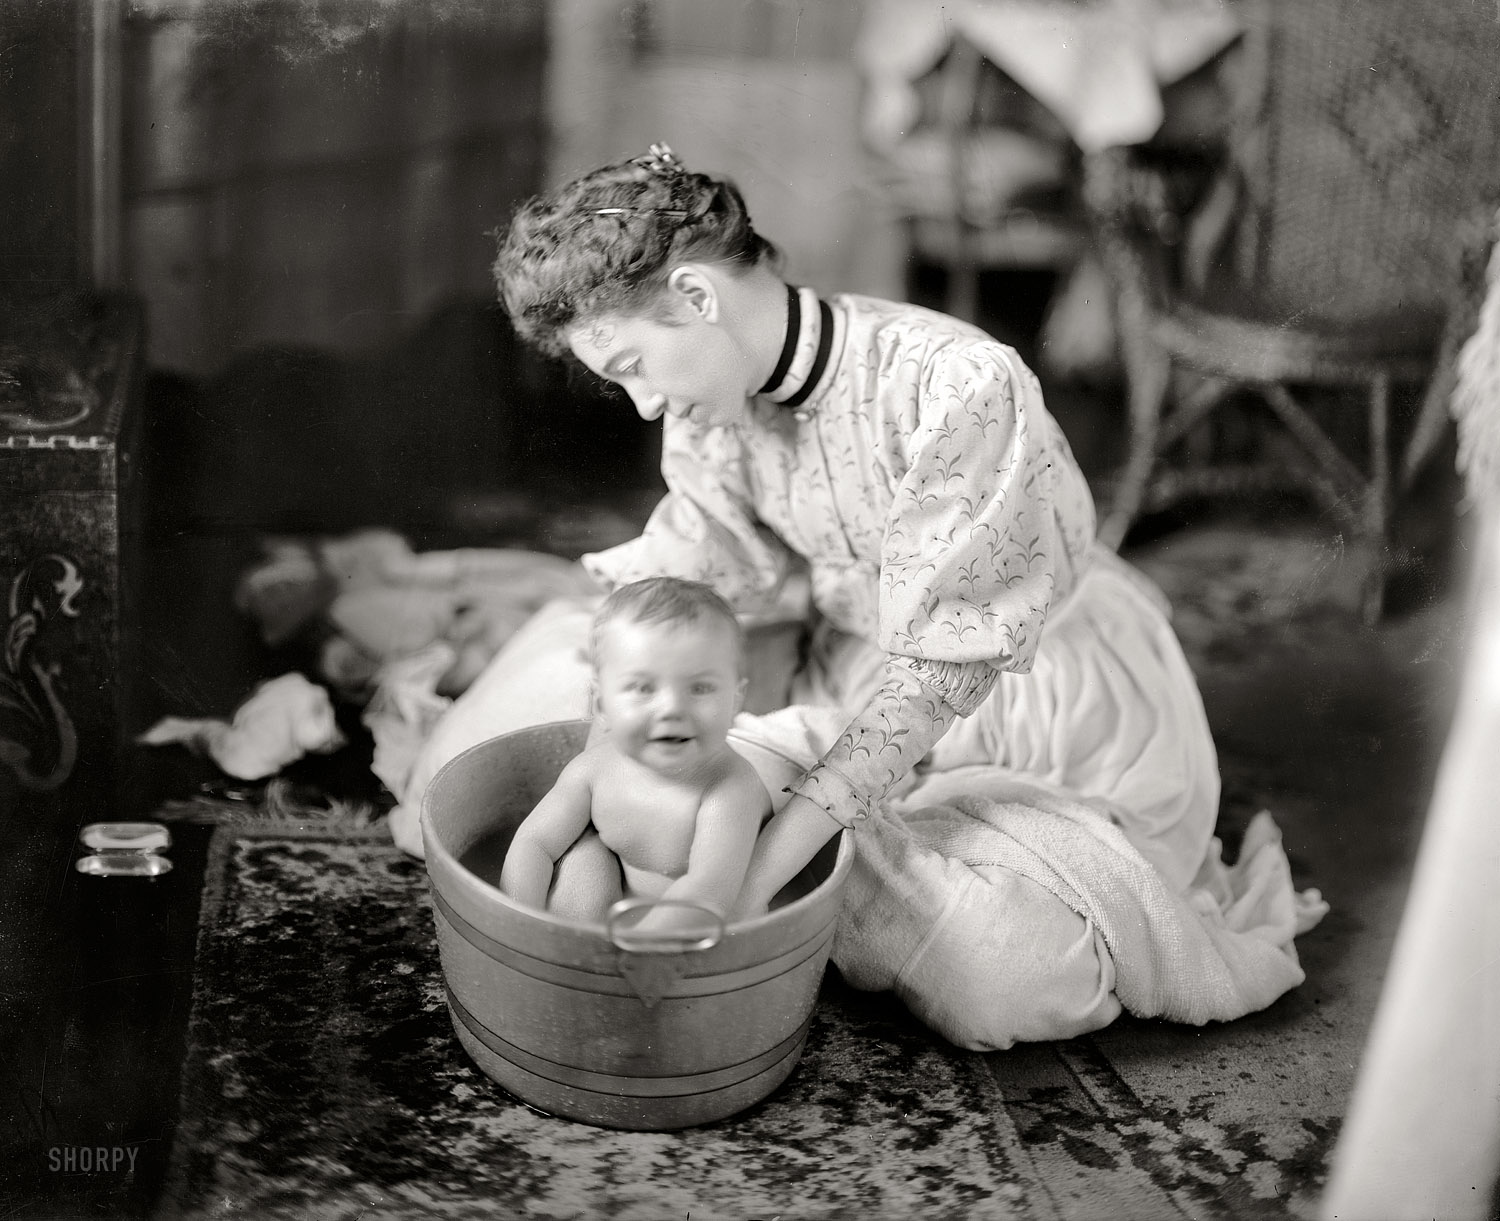 Circa 1905. "Martha Harris. Baby being washed." Maybe one (or two) of the Harrises of Harris & Ewing. Harris & Ewing glass negative. View full size.